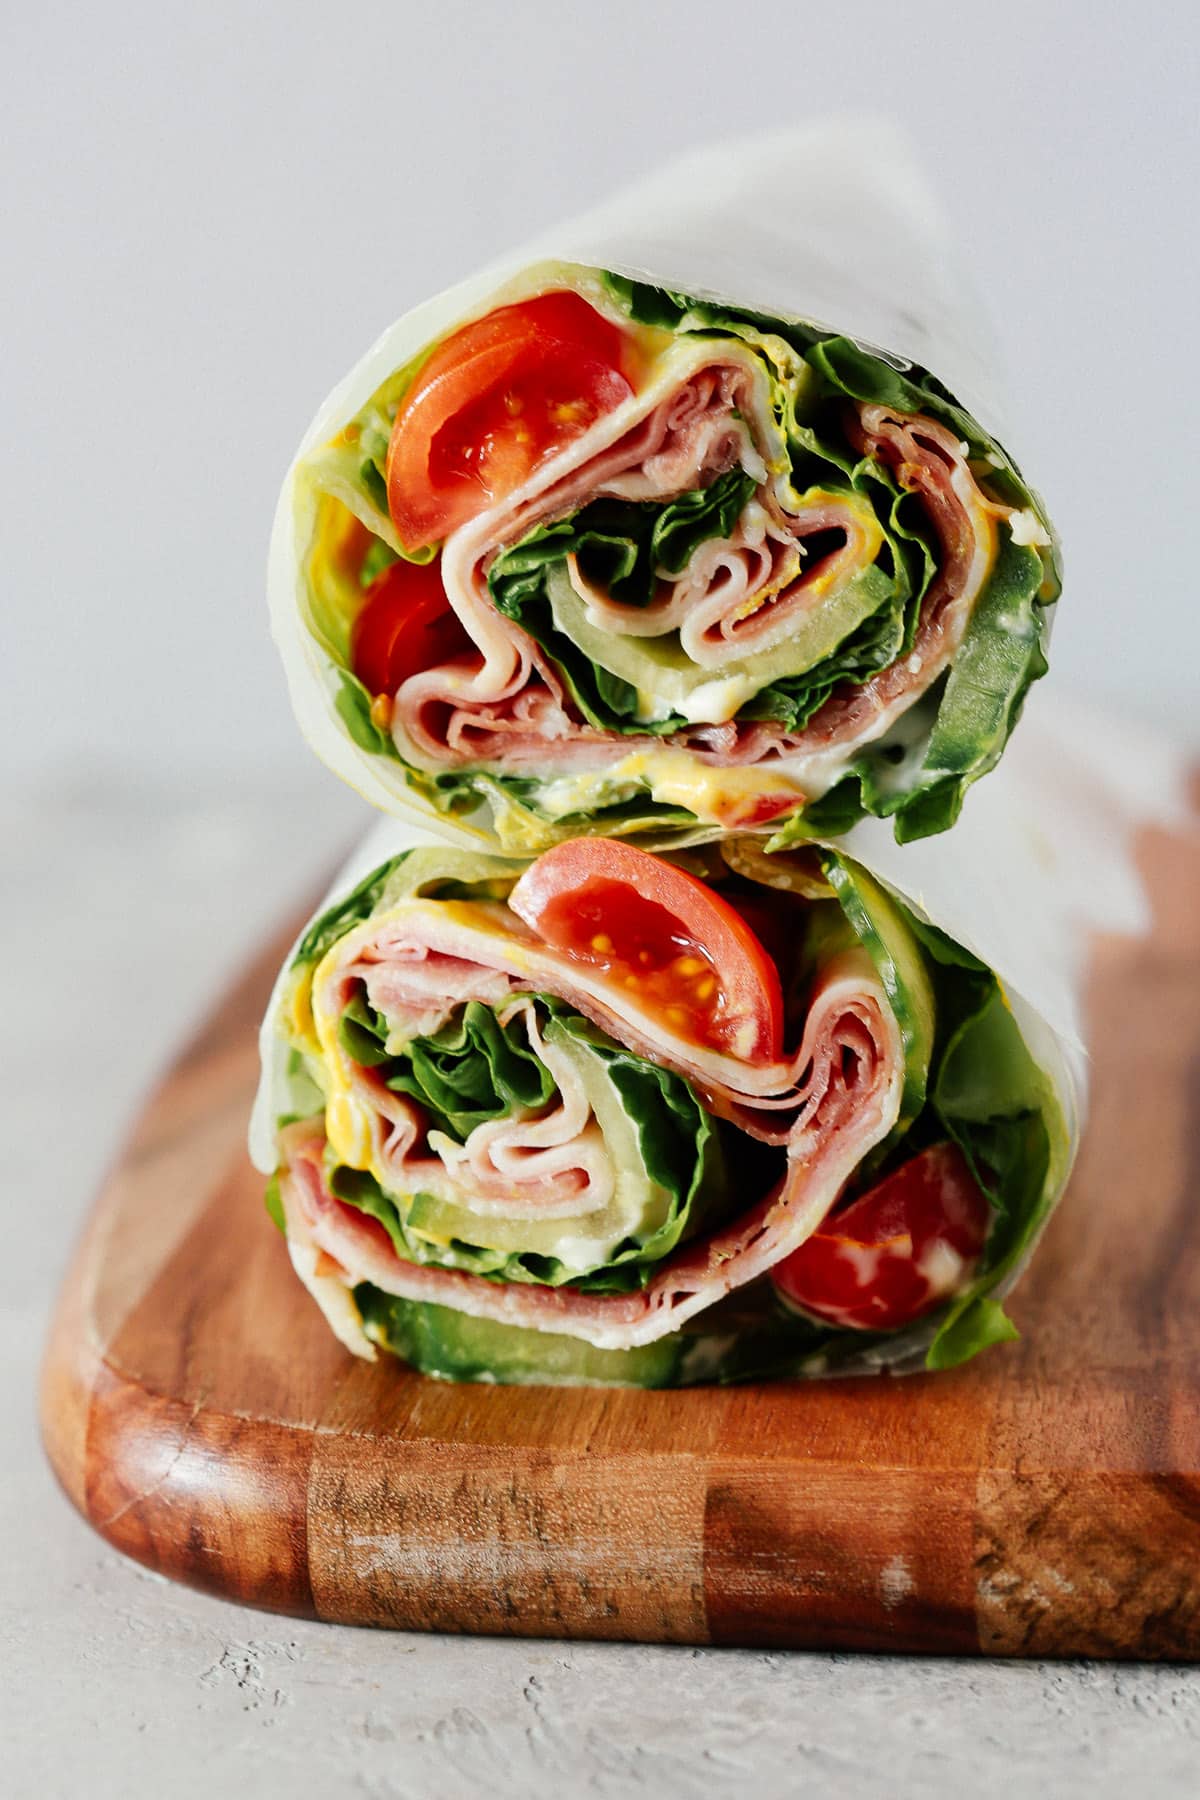 Cheese Sandwich Wraps - You'll Love This Easy Keto Recipe Hack!